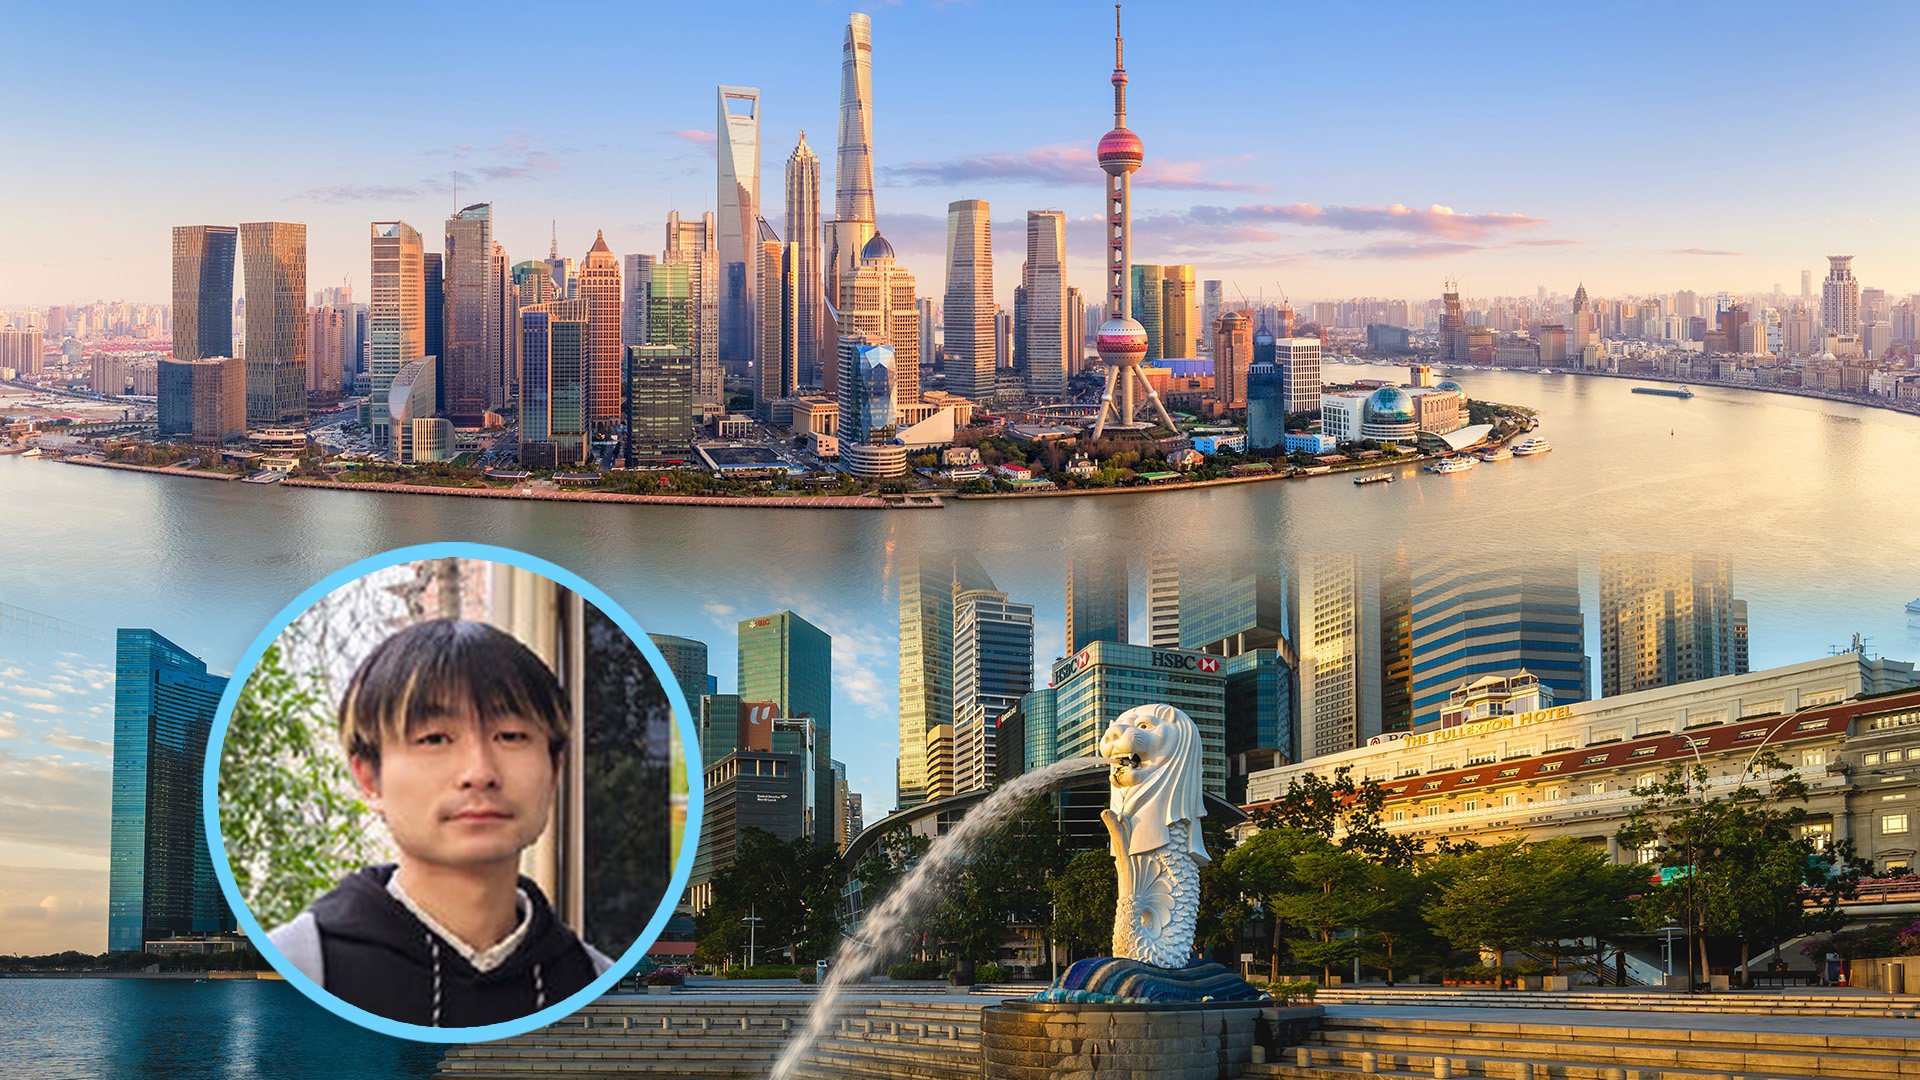 A university student from China who travelled from Shanghai to Singapore by bus in 29 days, spending just US$400, has surprised many people and divided online opinion. Photo: SCMP composite/Shutterstock/big5.news.cn